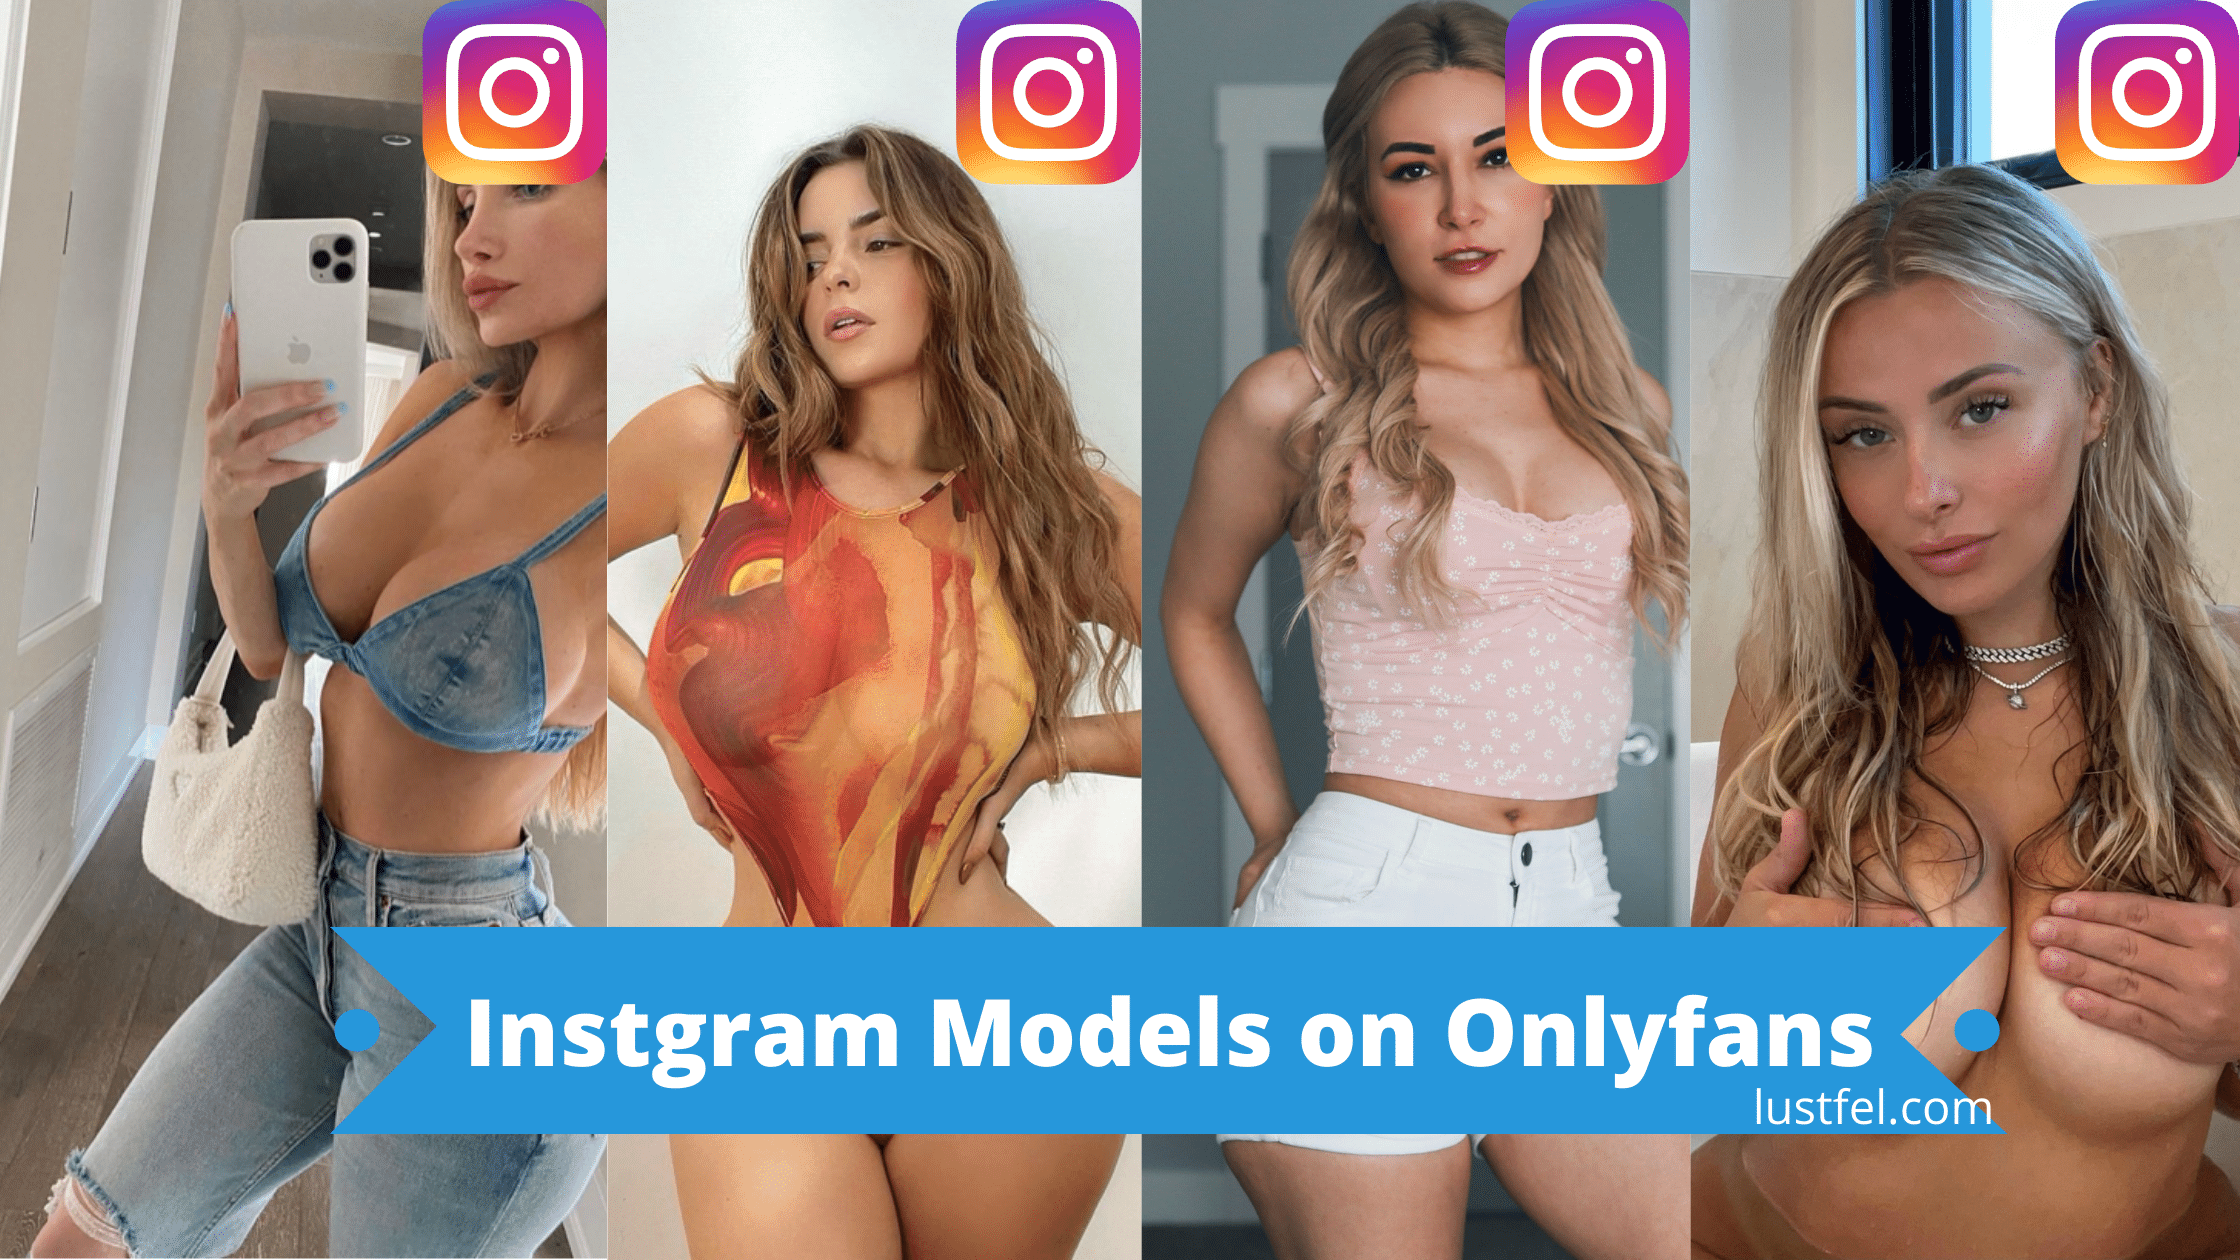 Nude only fans models